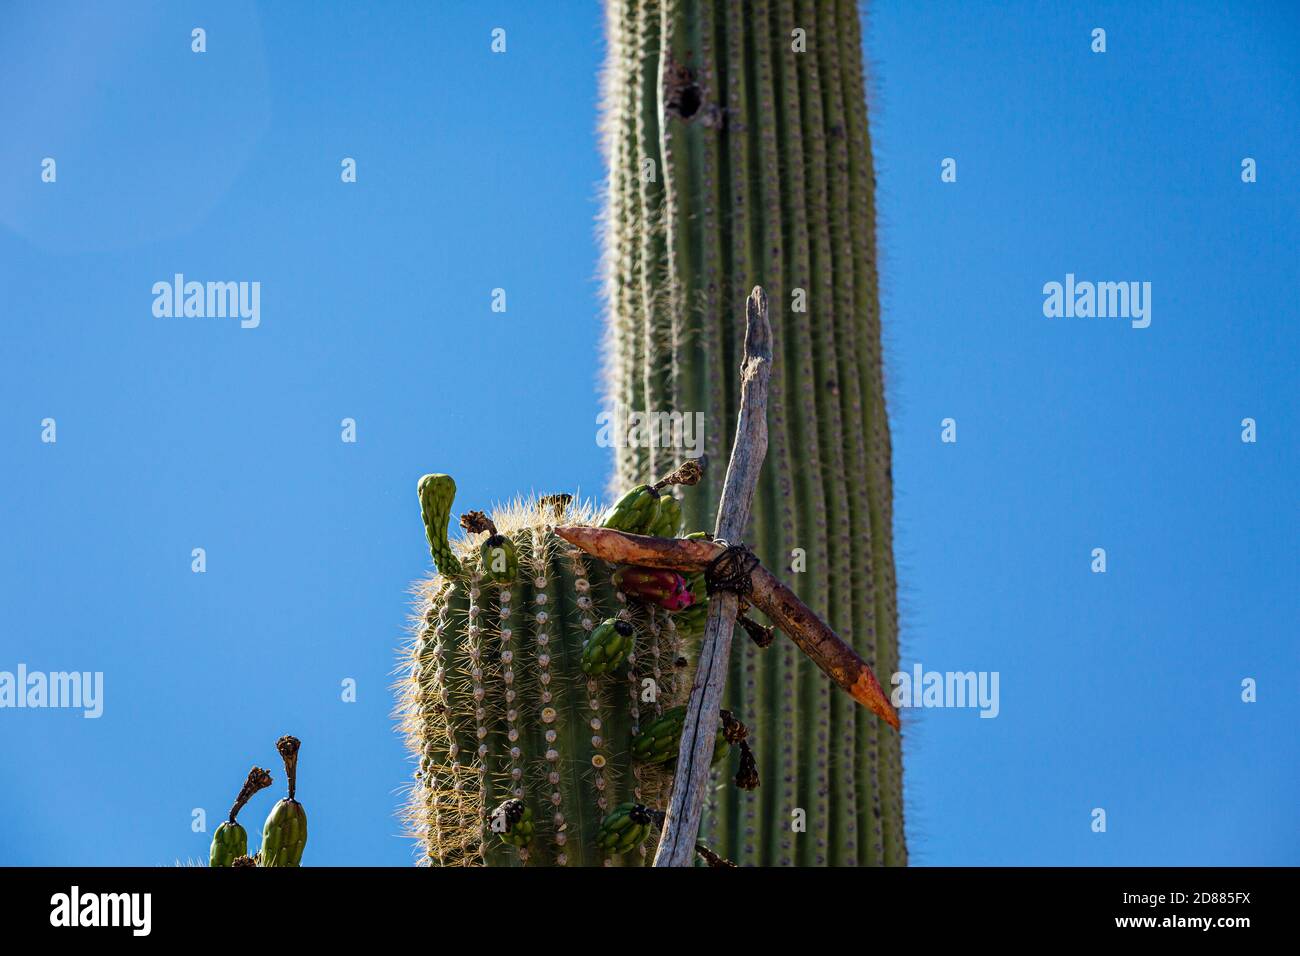 These Ku’ipad (saguaro ribs with cross members) are used to harvest saguaro fruit in a traditional harvest by the Tohono O’odham. (a Native American p Stock Photo